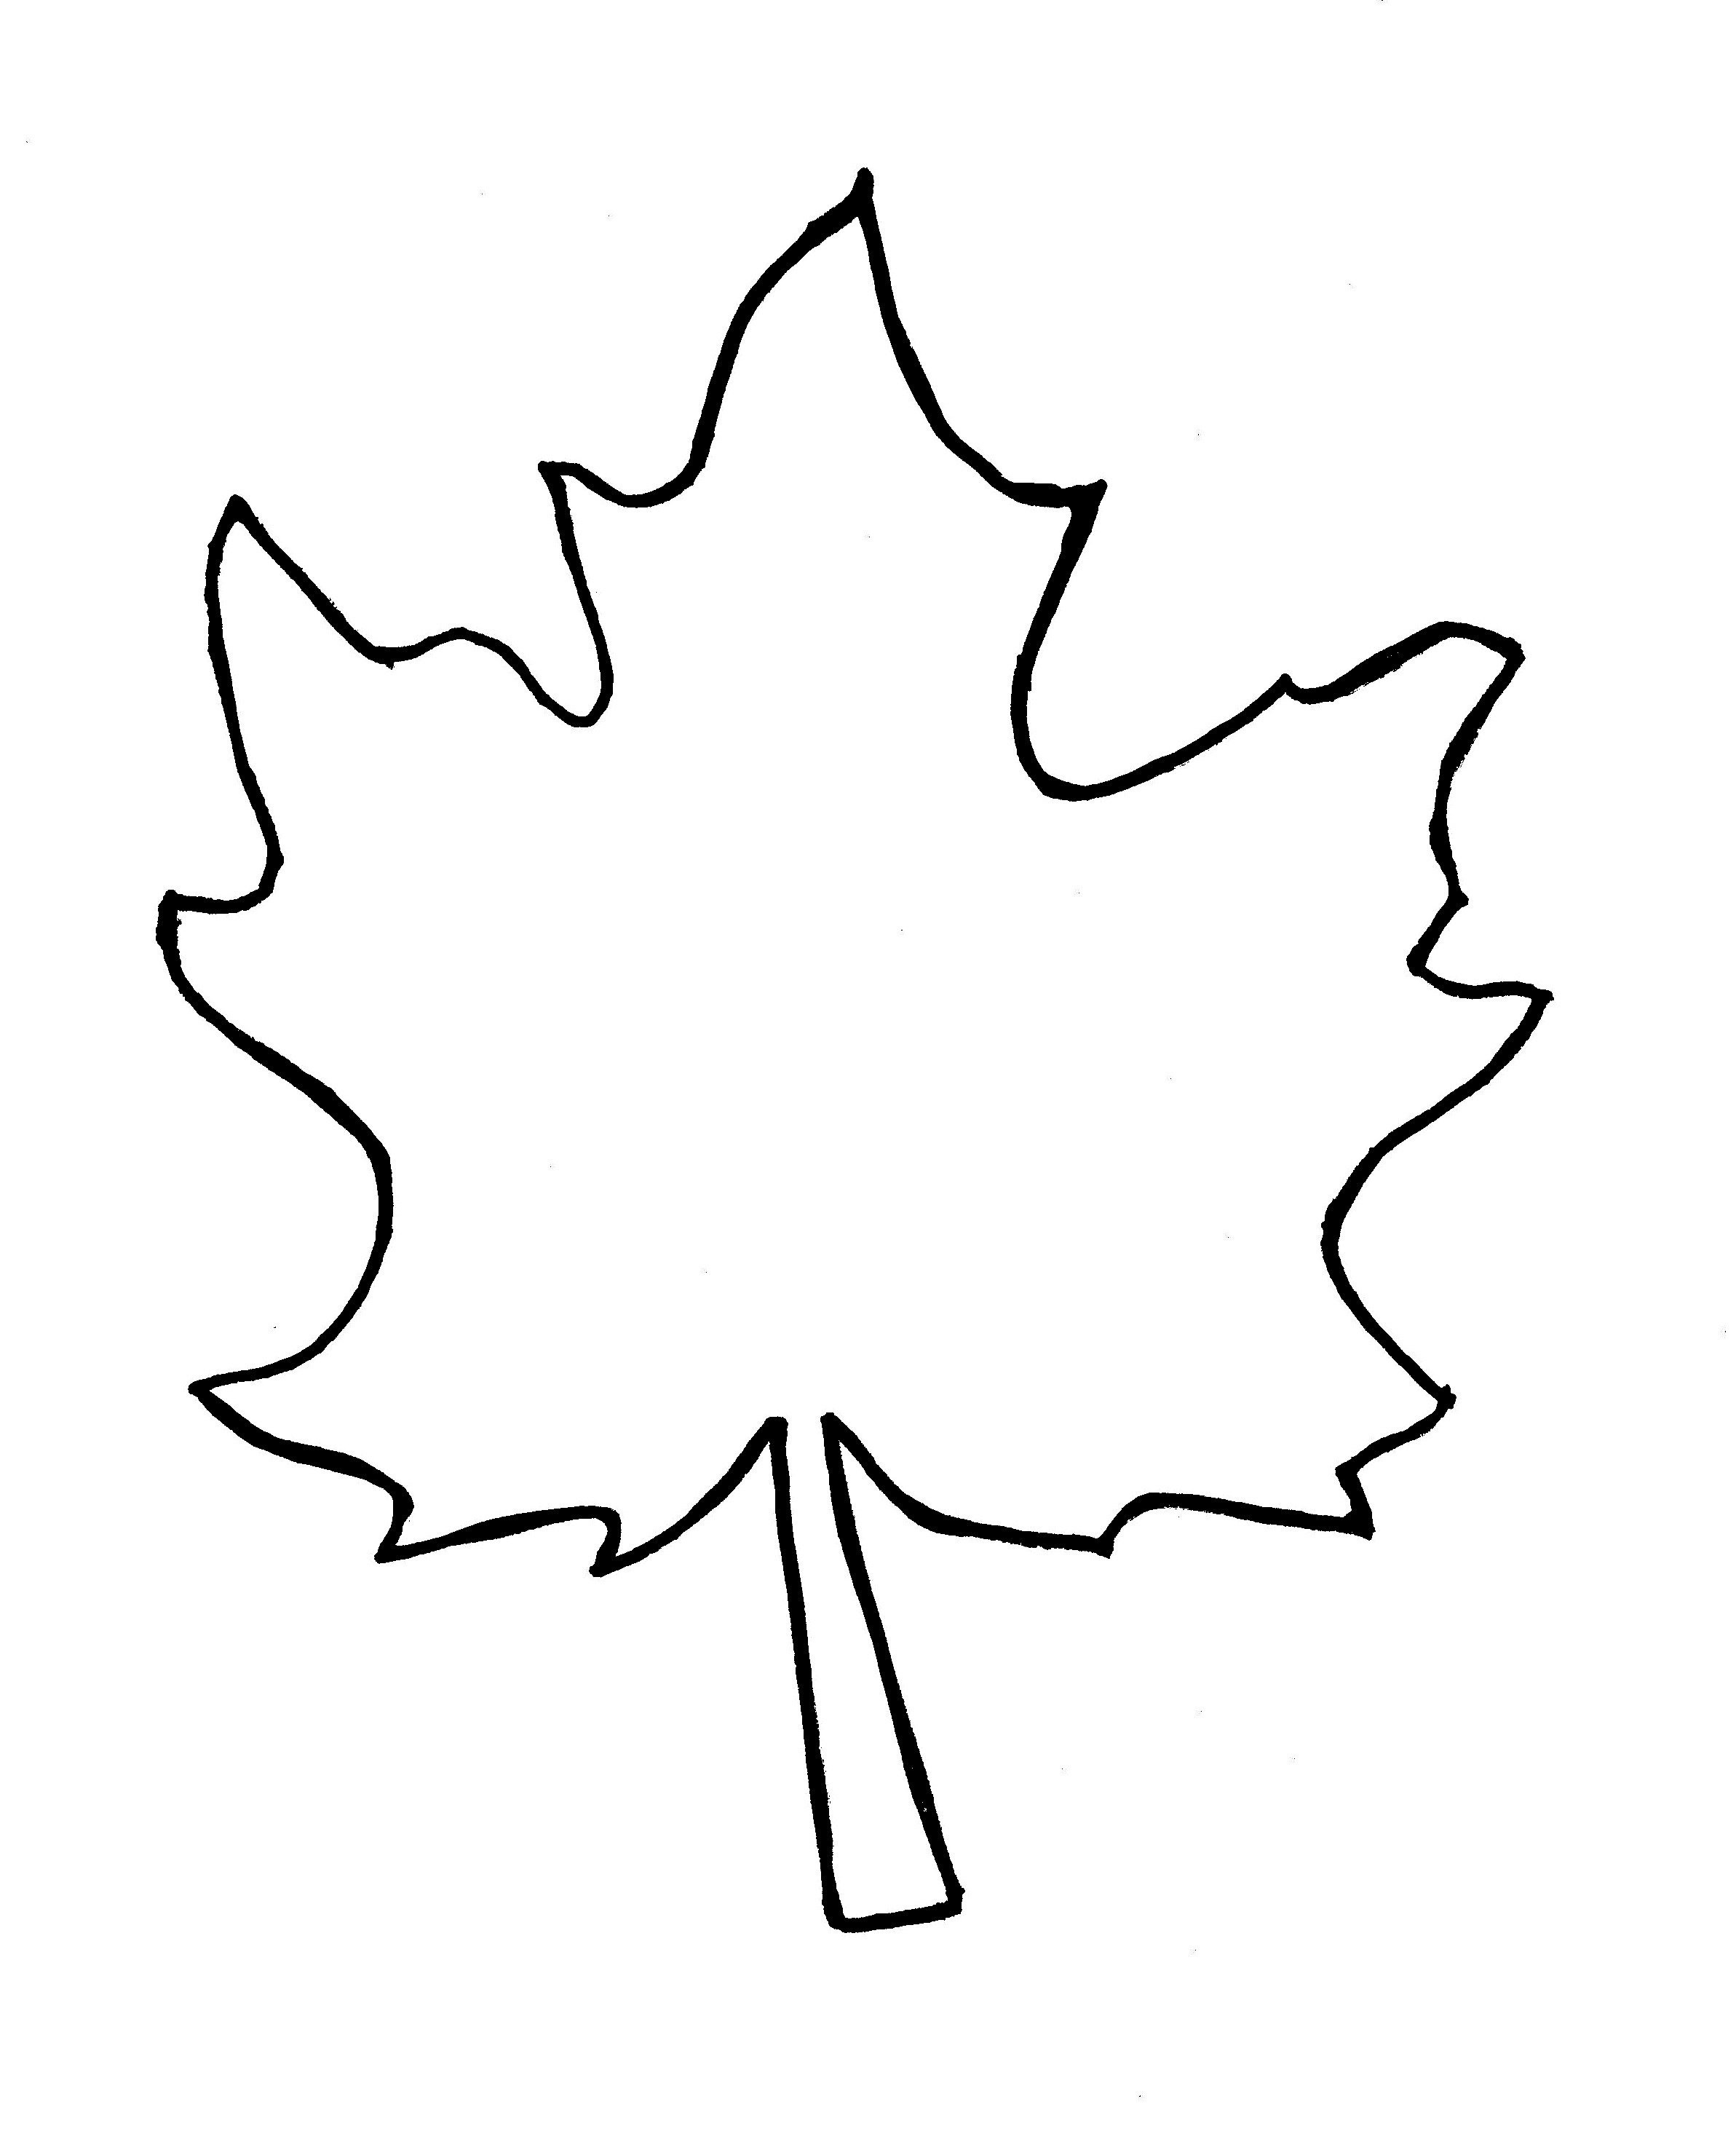 Free Autumn Leaf Outline, Download Free Clip Art, Free Clip Art On - Free Printable Pictures Of Autumn Leaves